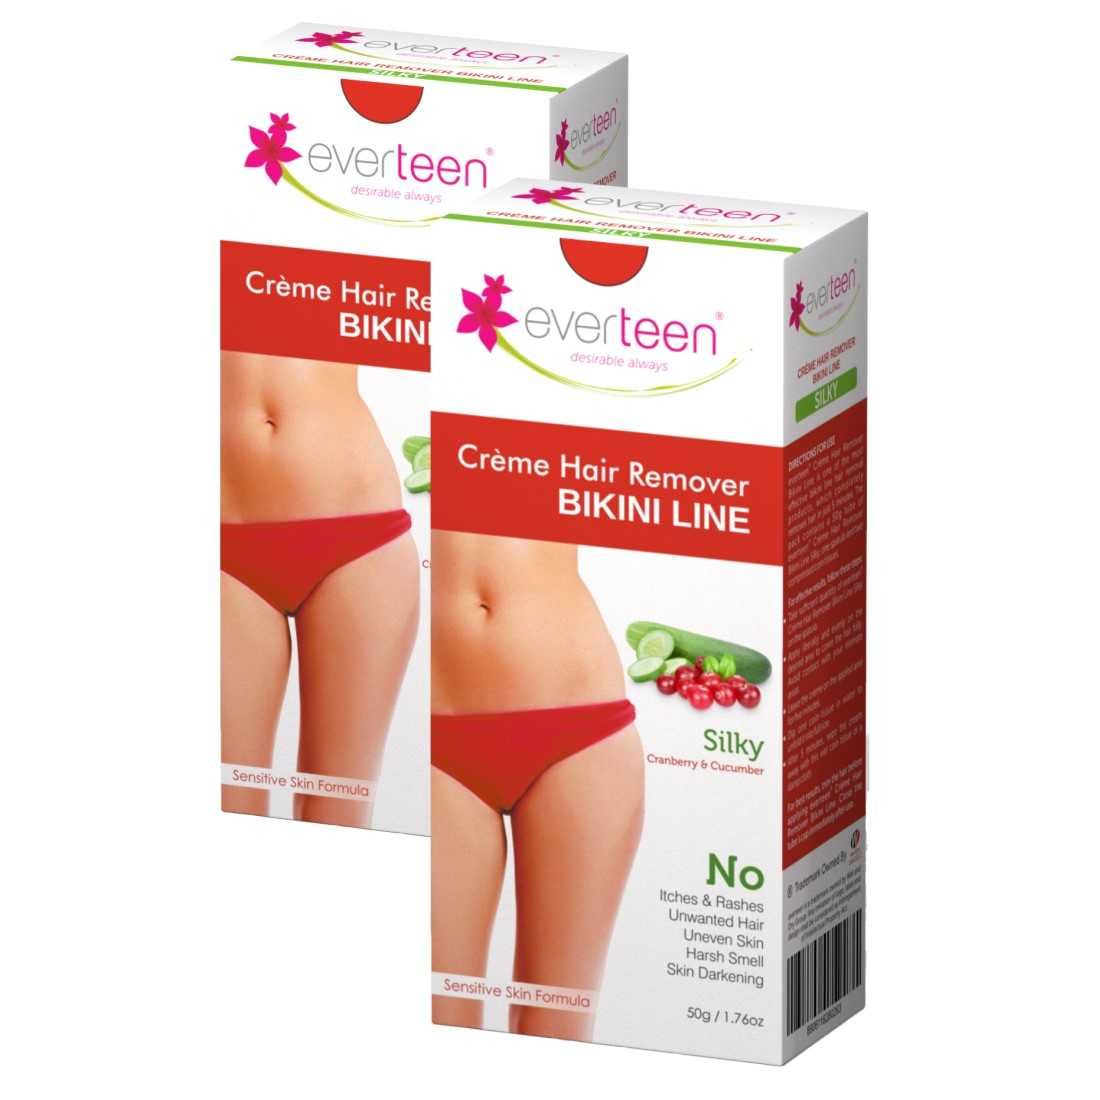 everteen SILKY Hair Removal Cream with Cranberry and Cucumber for Bikini  Line  Underarms in Women and Girls  No Harsh Smell Skin Darkening or  Rashes  2 Pack 50g Each with